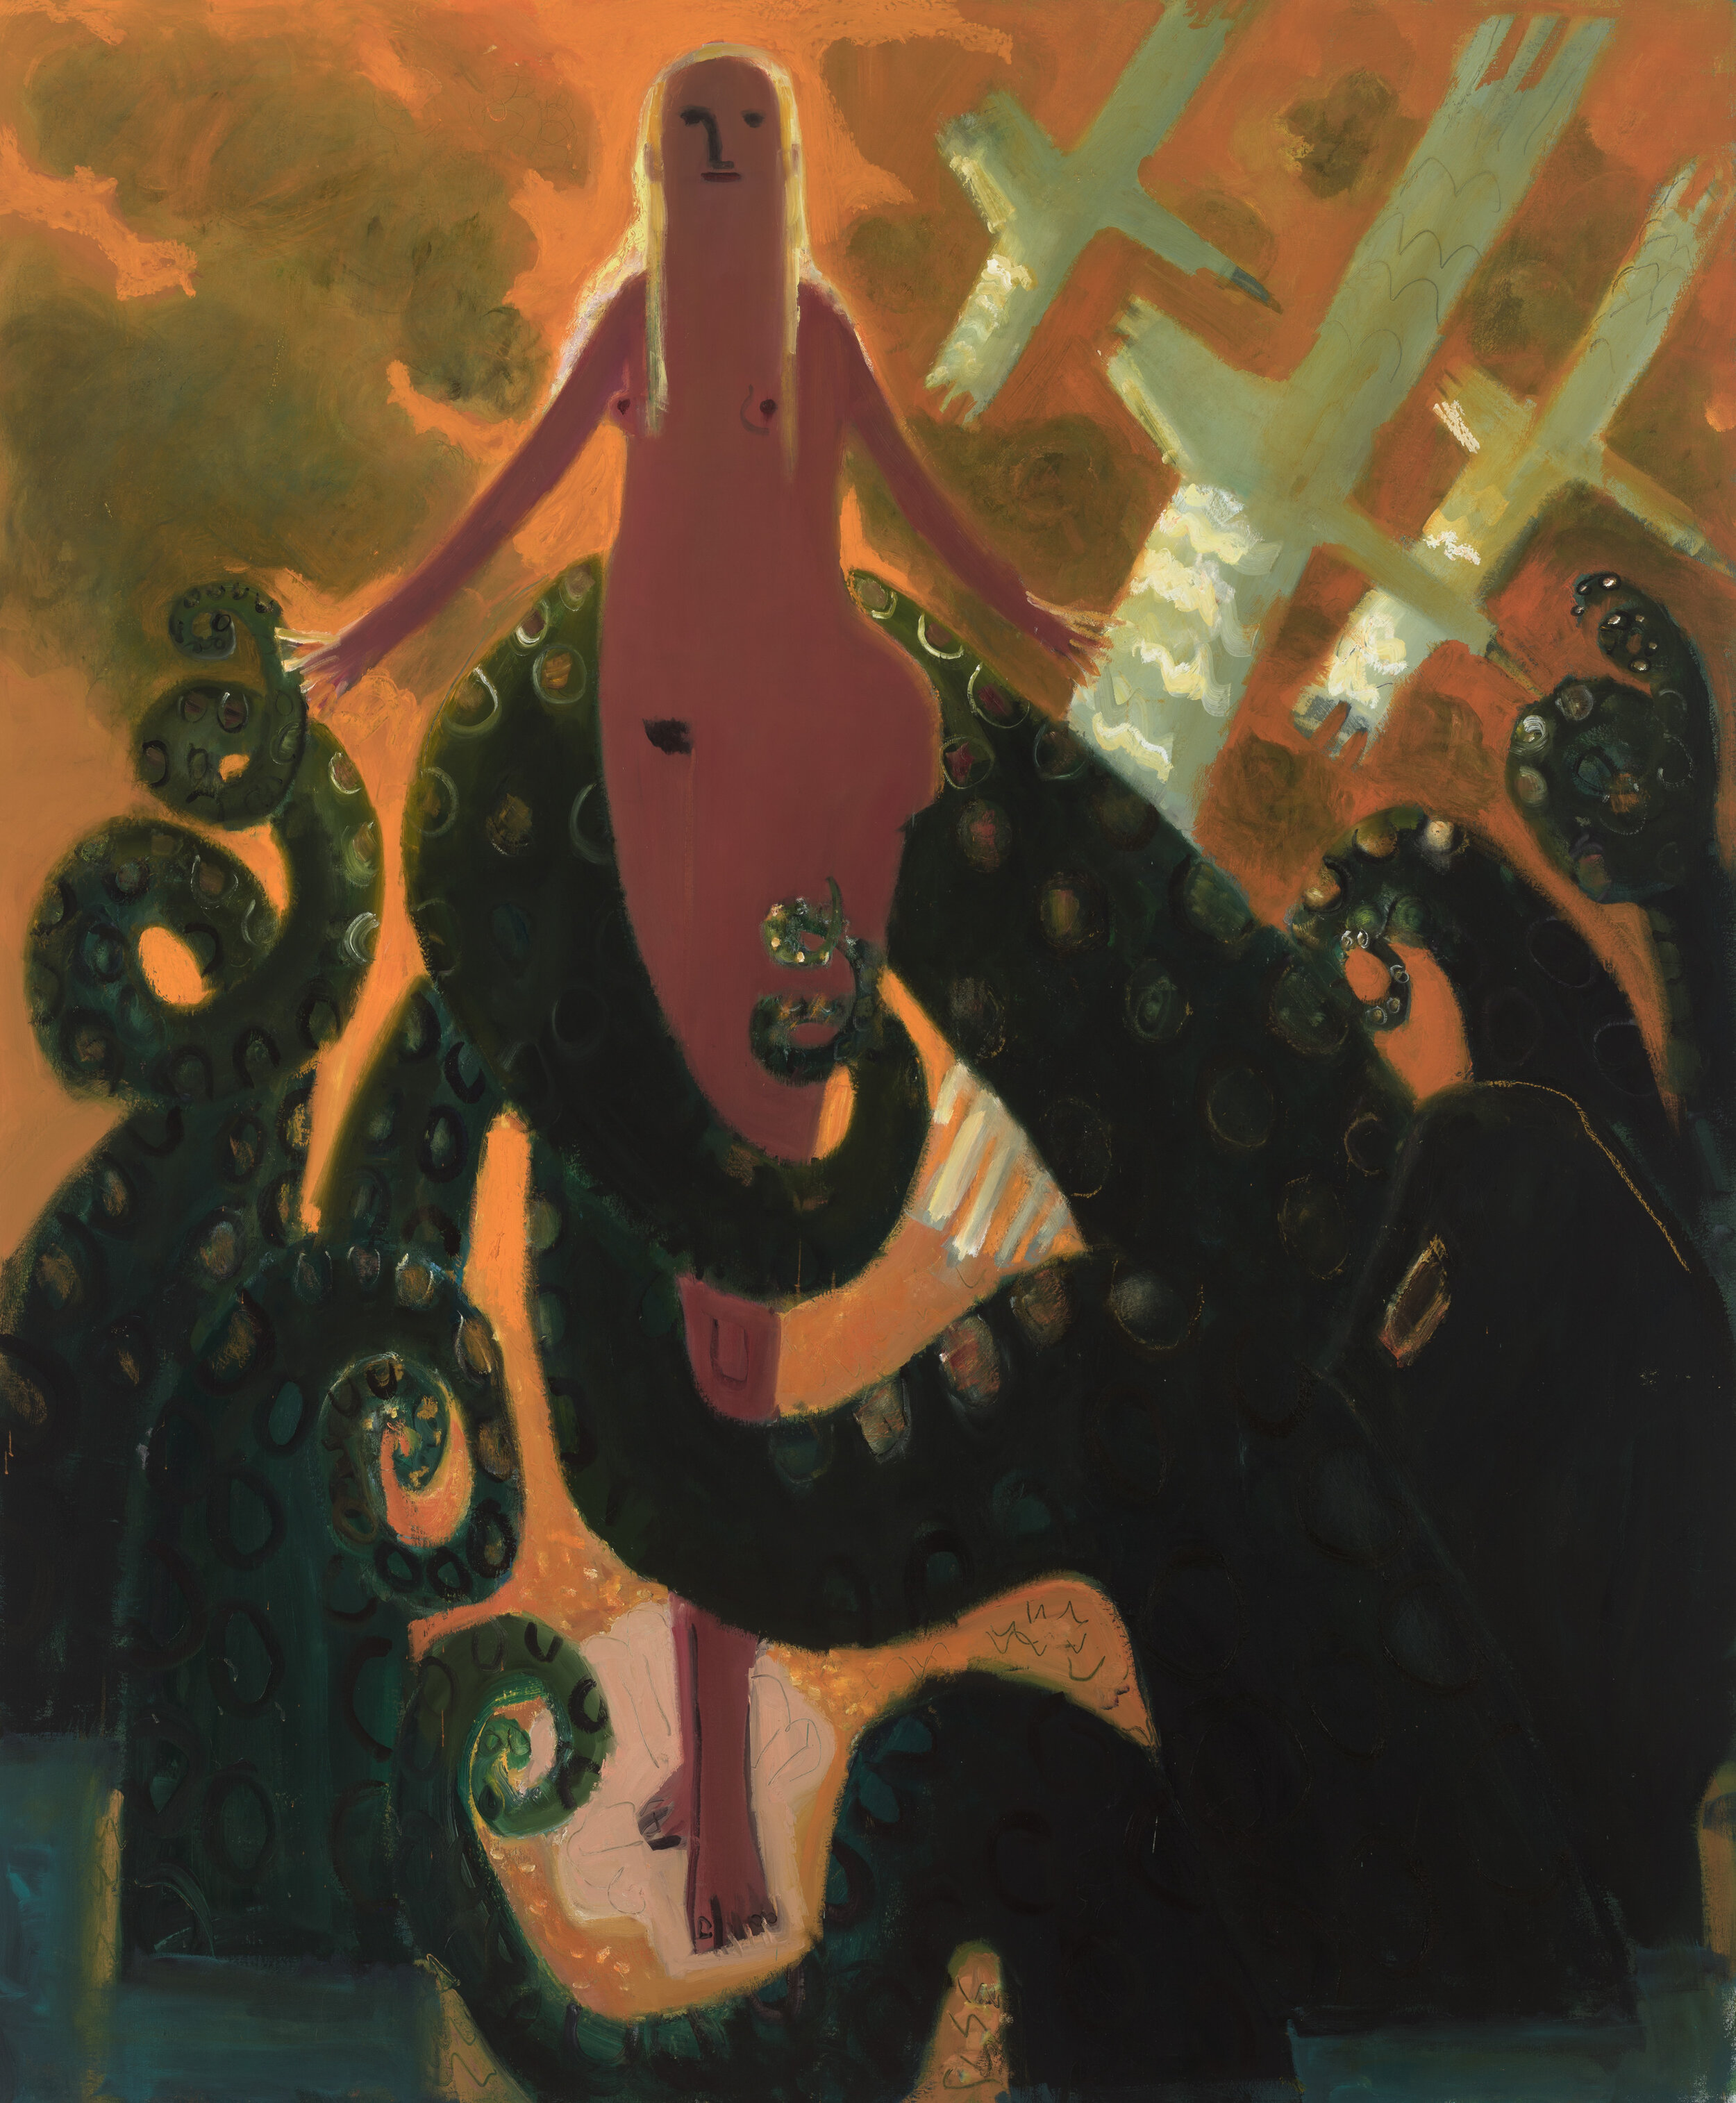 Kyle Staver, Venus and the Octopus, 2019